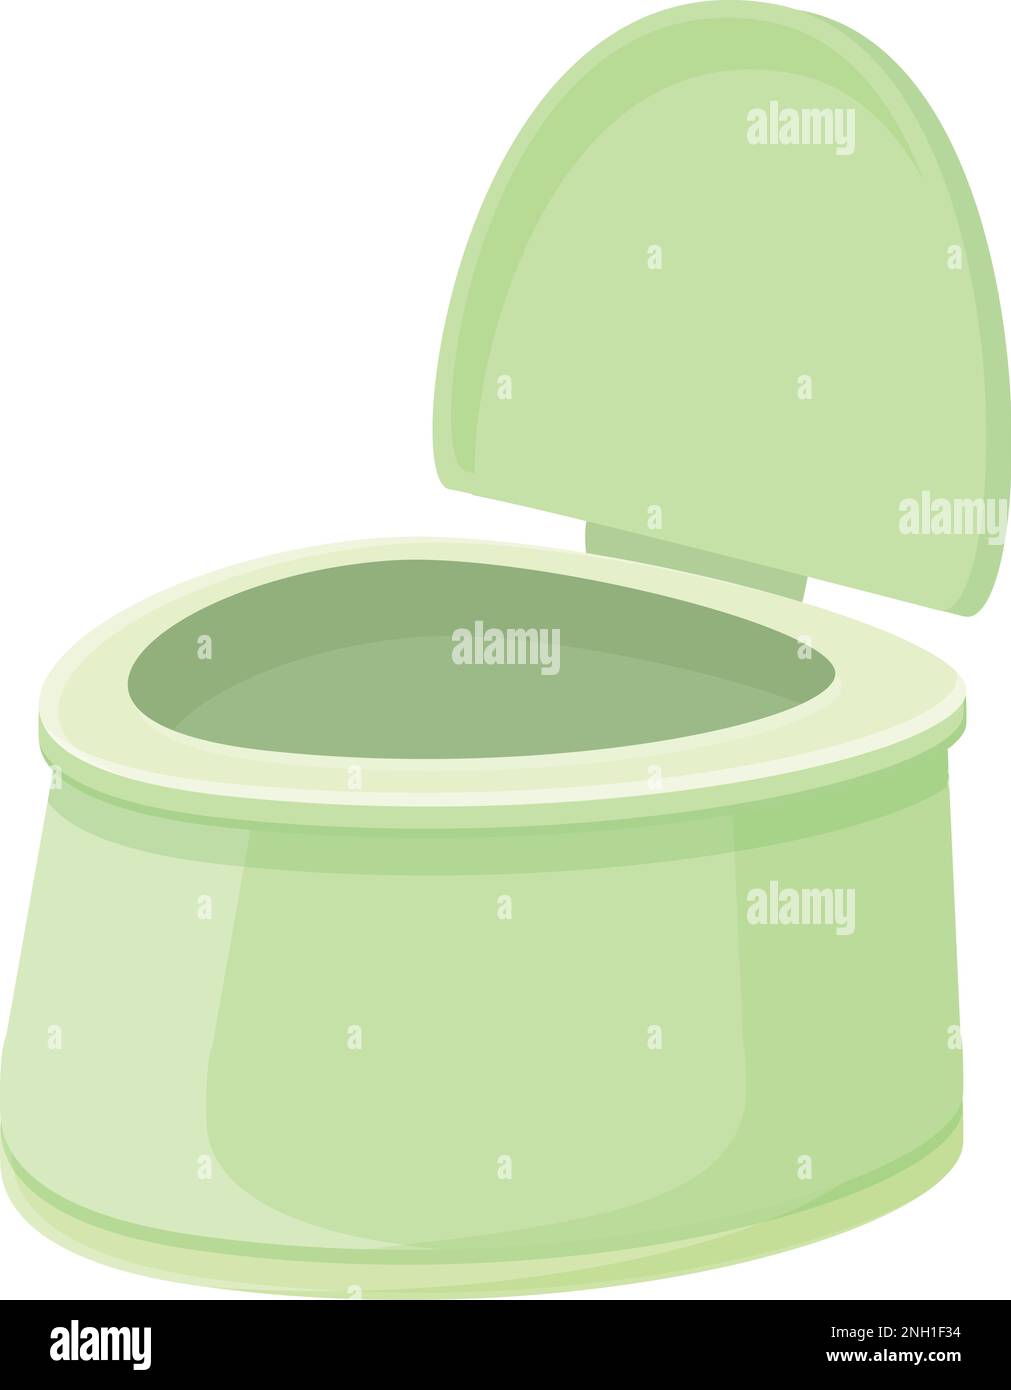 Toilet seat for child Stock Vector Images - Alamy